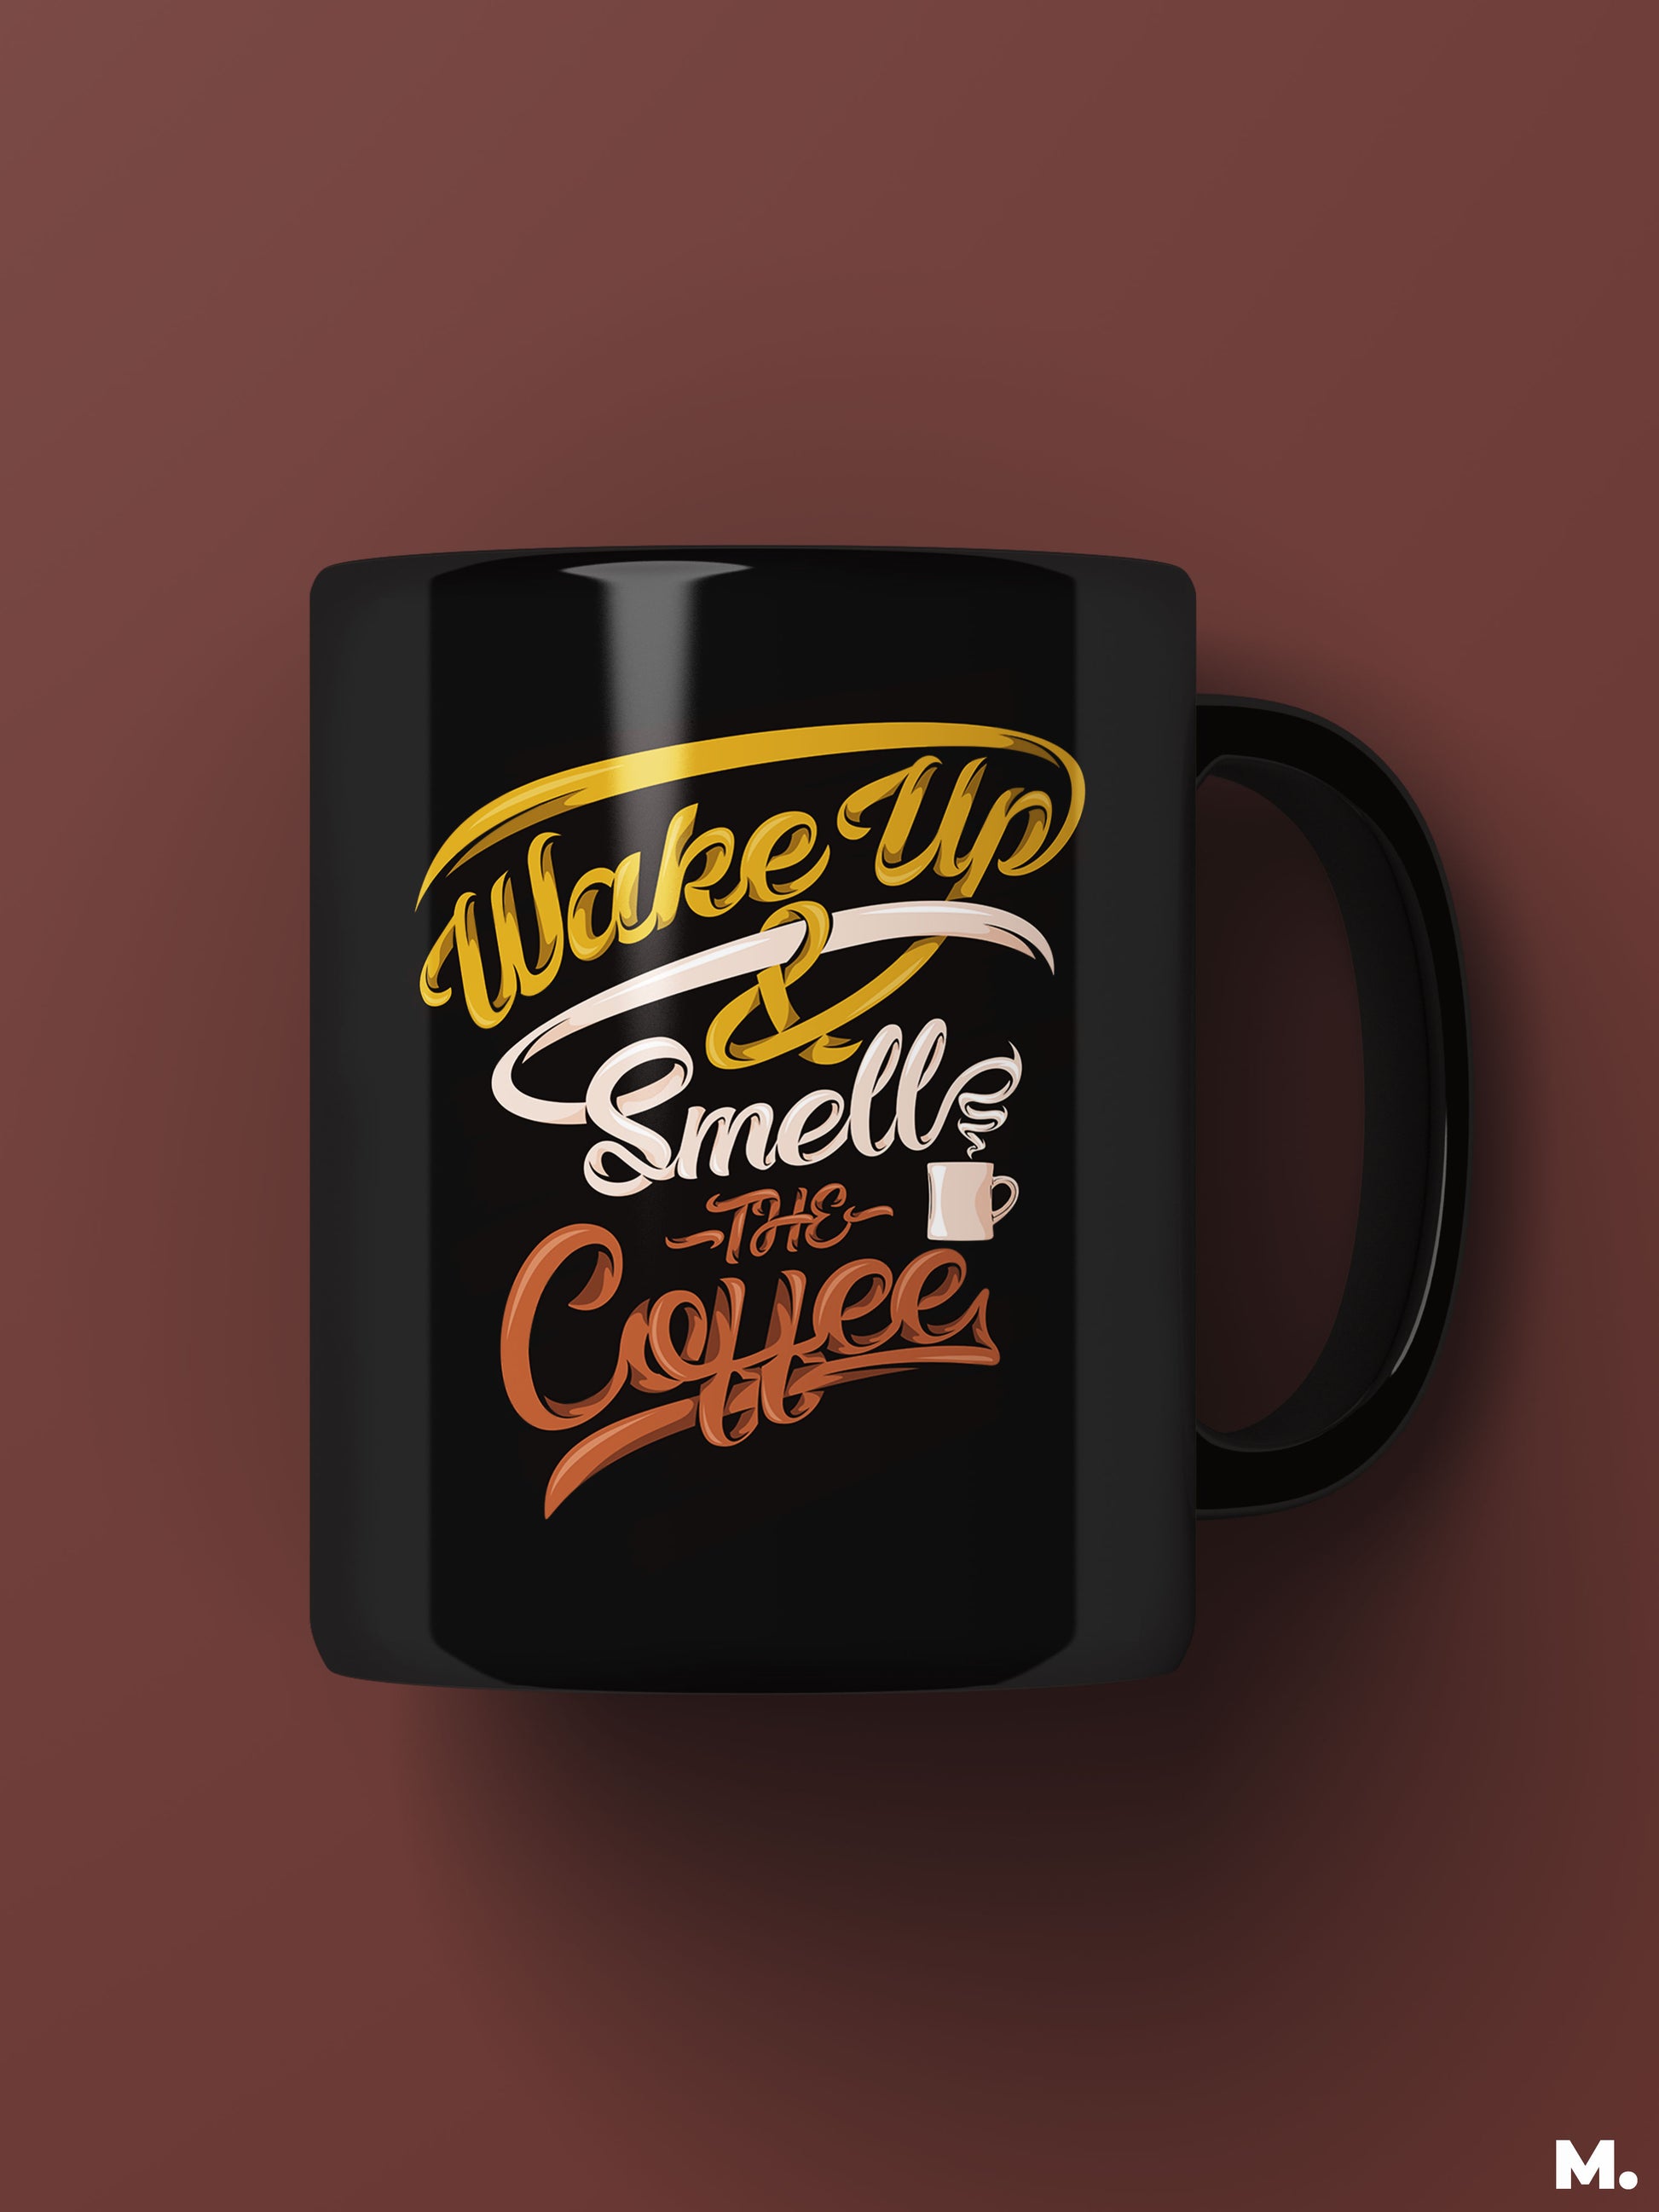 Black coffee printed mugs online printed with "wake up and smell the coffee" - Muselot